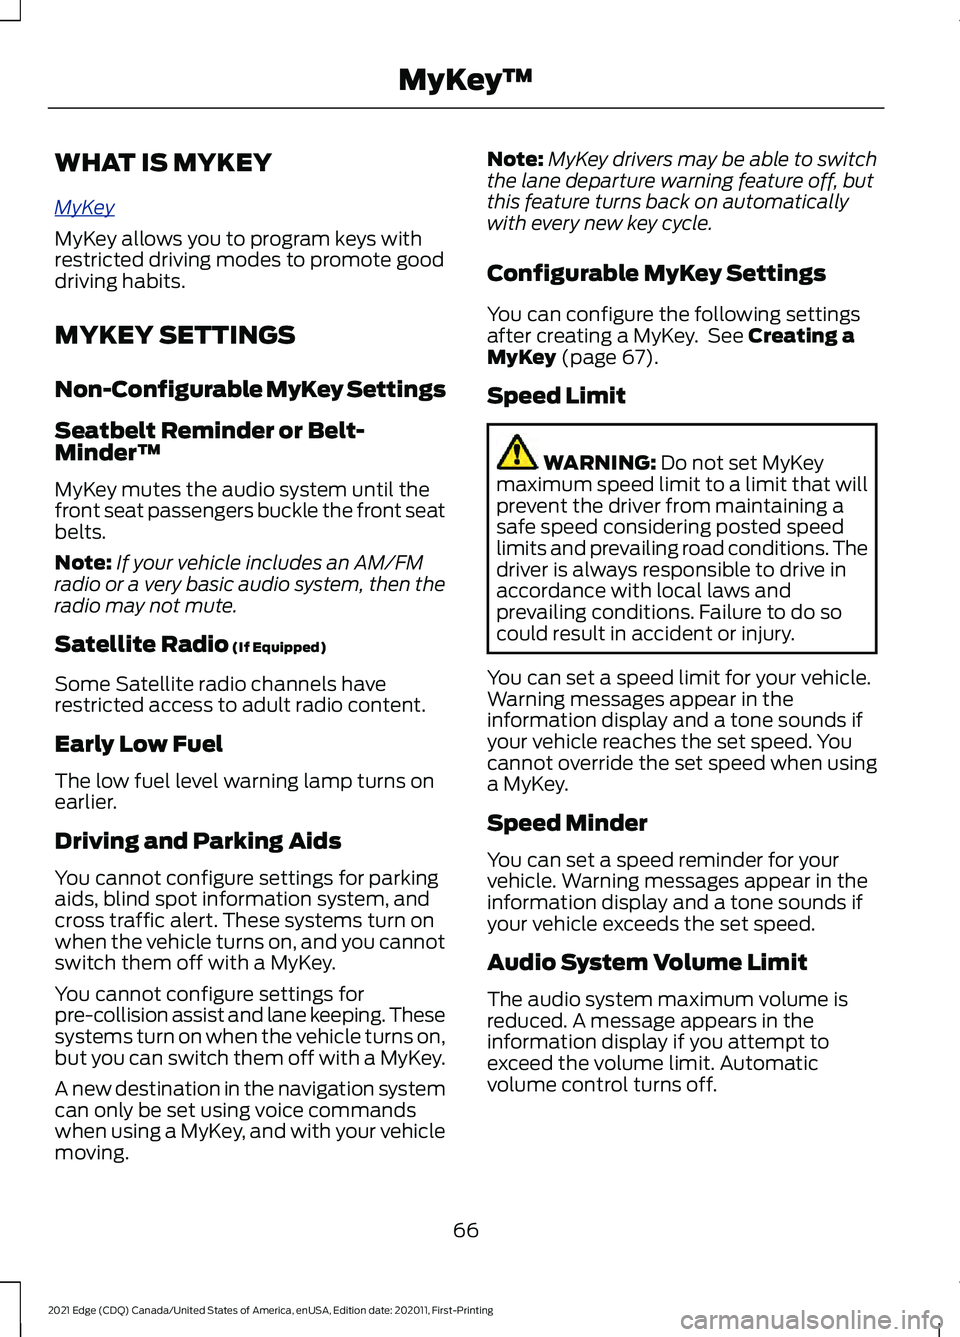 FORD EDGE 2021 Owners Guide WHAT IS MYKEY
MyK
e y
MyKey allows you to program keys with
restricted driving modes to promote good
driving habits.
MYKEY SETTINGS
Non-Configurable MyKey Settings
Seatbelt Reminder or Belt-
Minder™